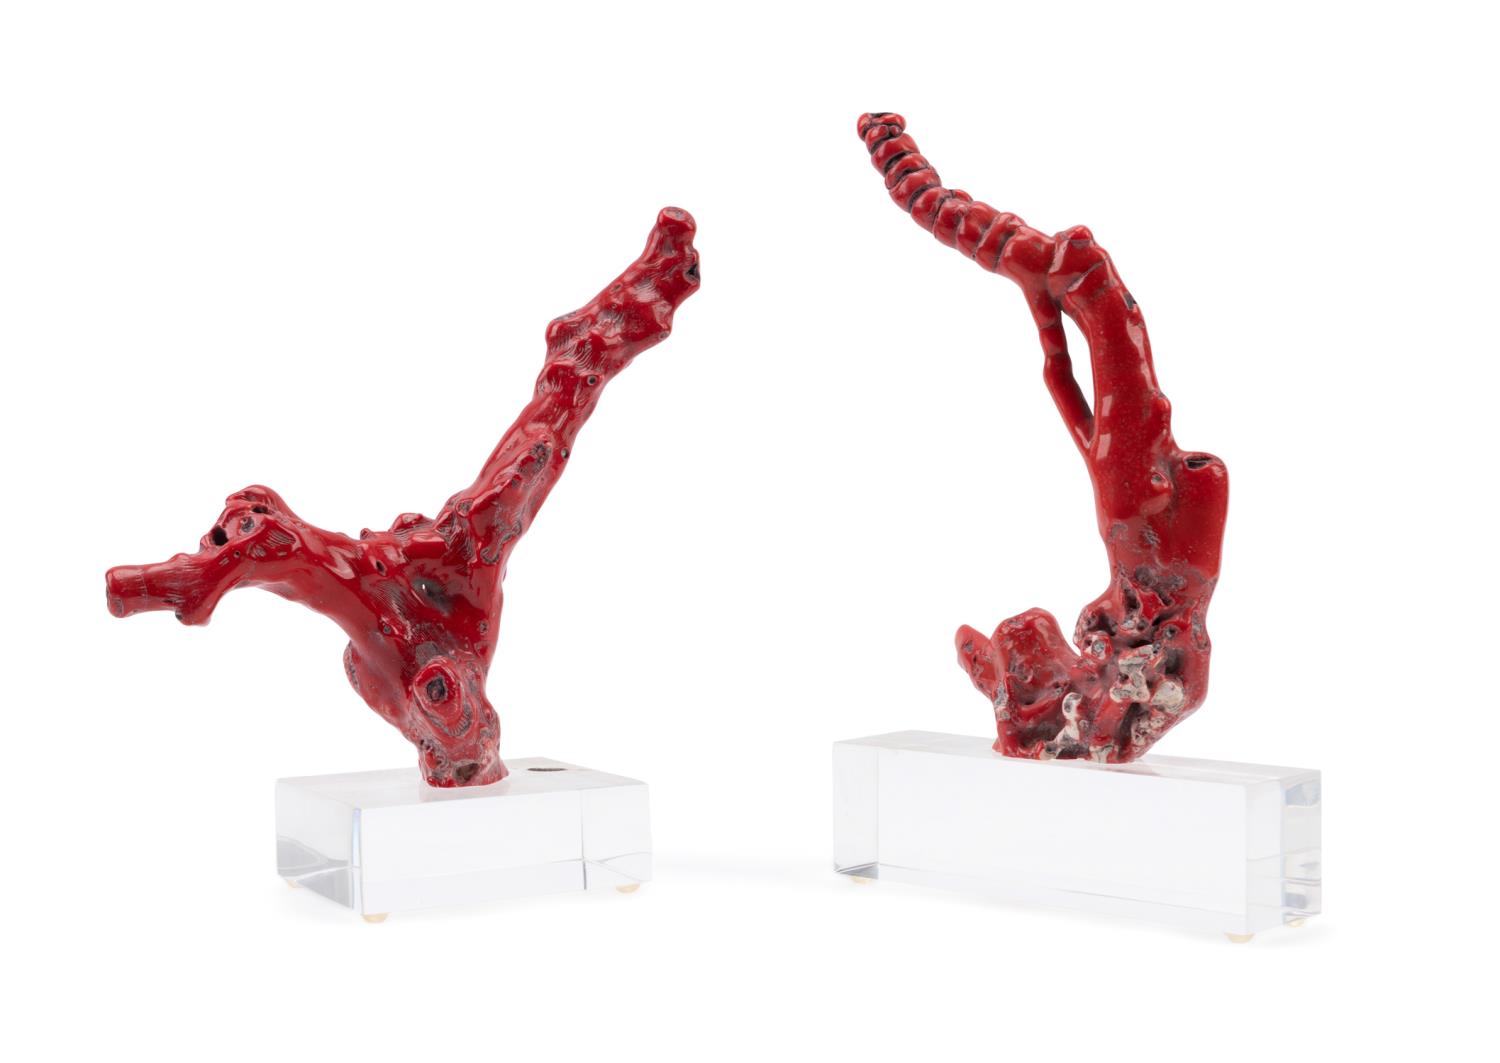 PAIR MOUNTED RED CORAL SPECIMENS 3b40a4